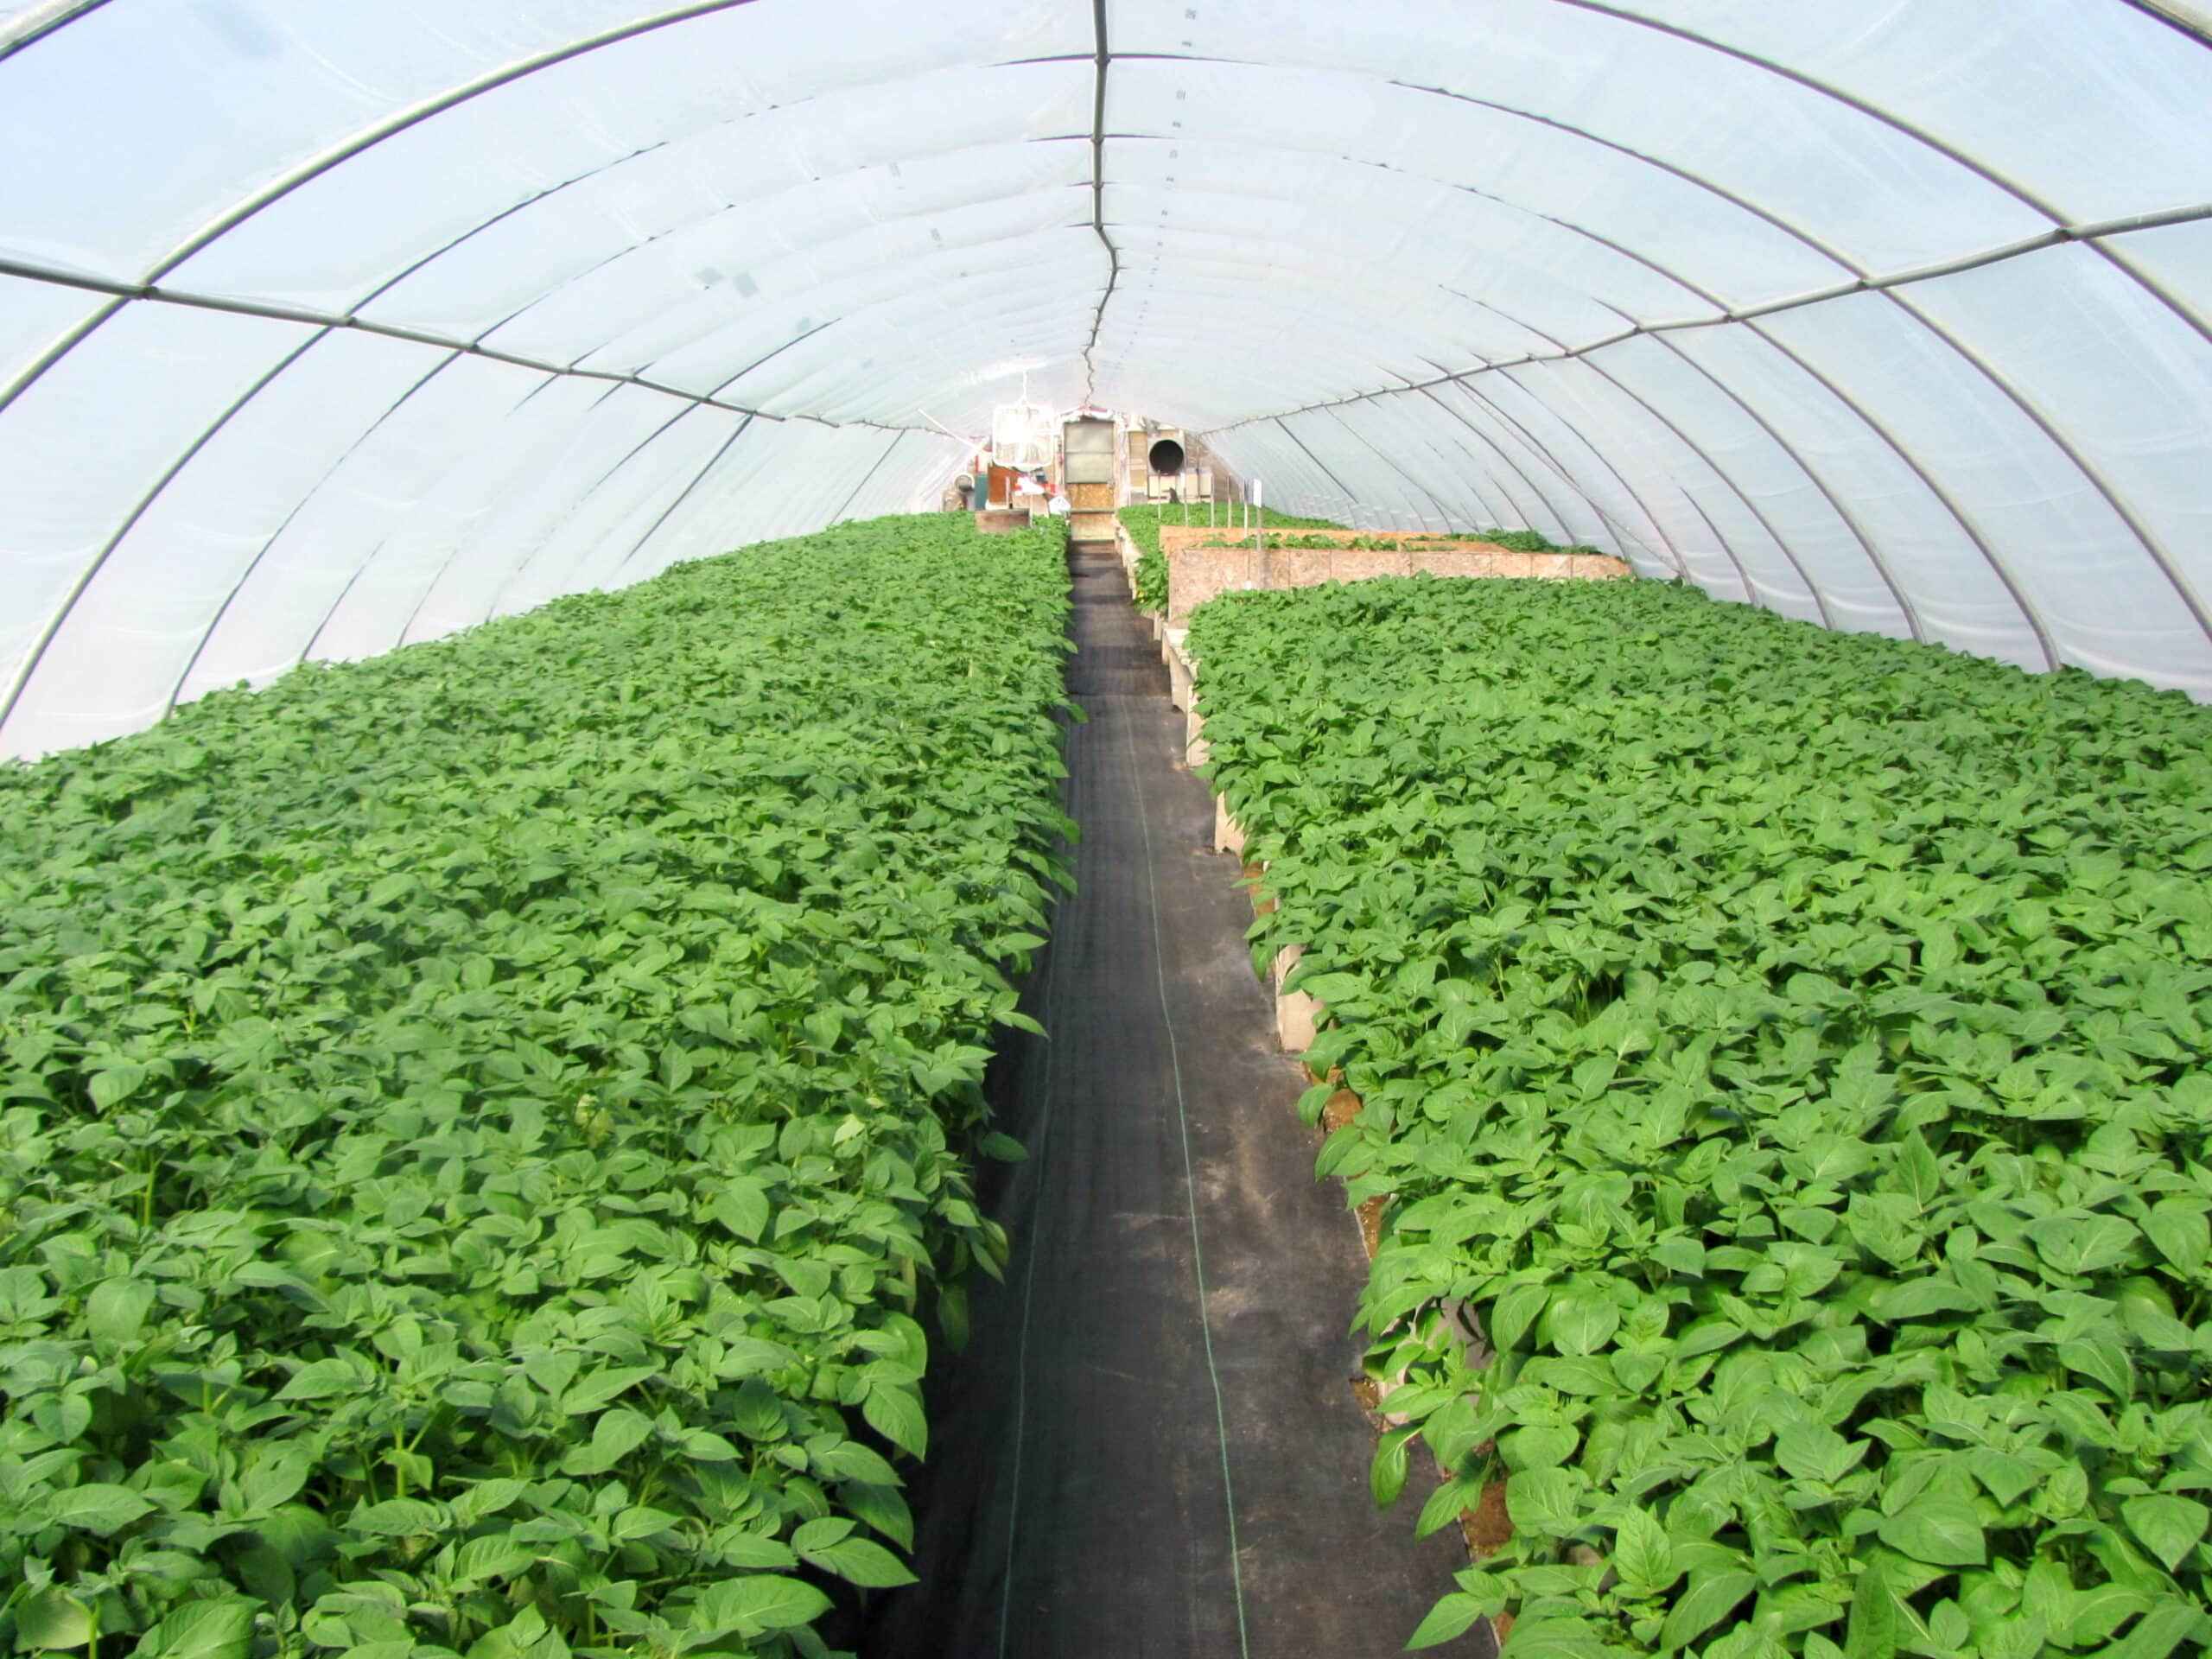 Minituber production in a greenhouse